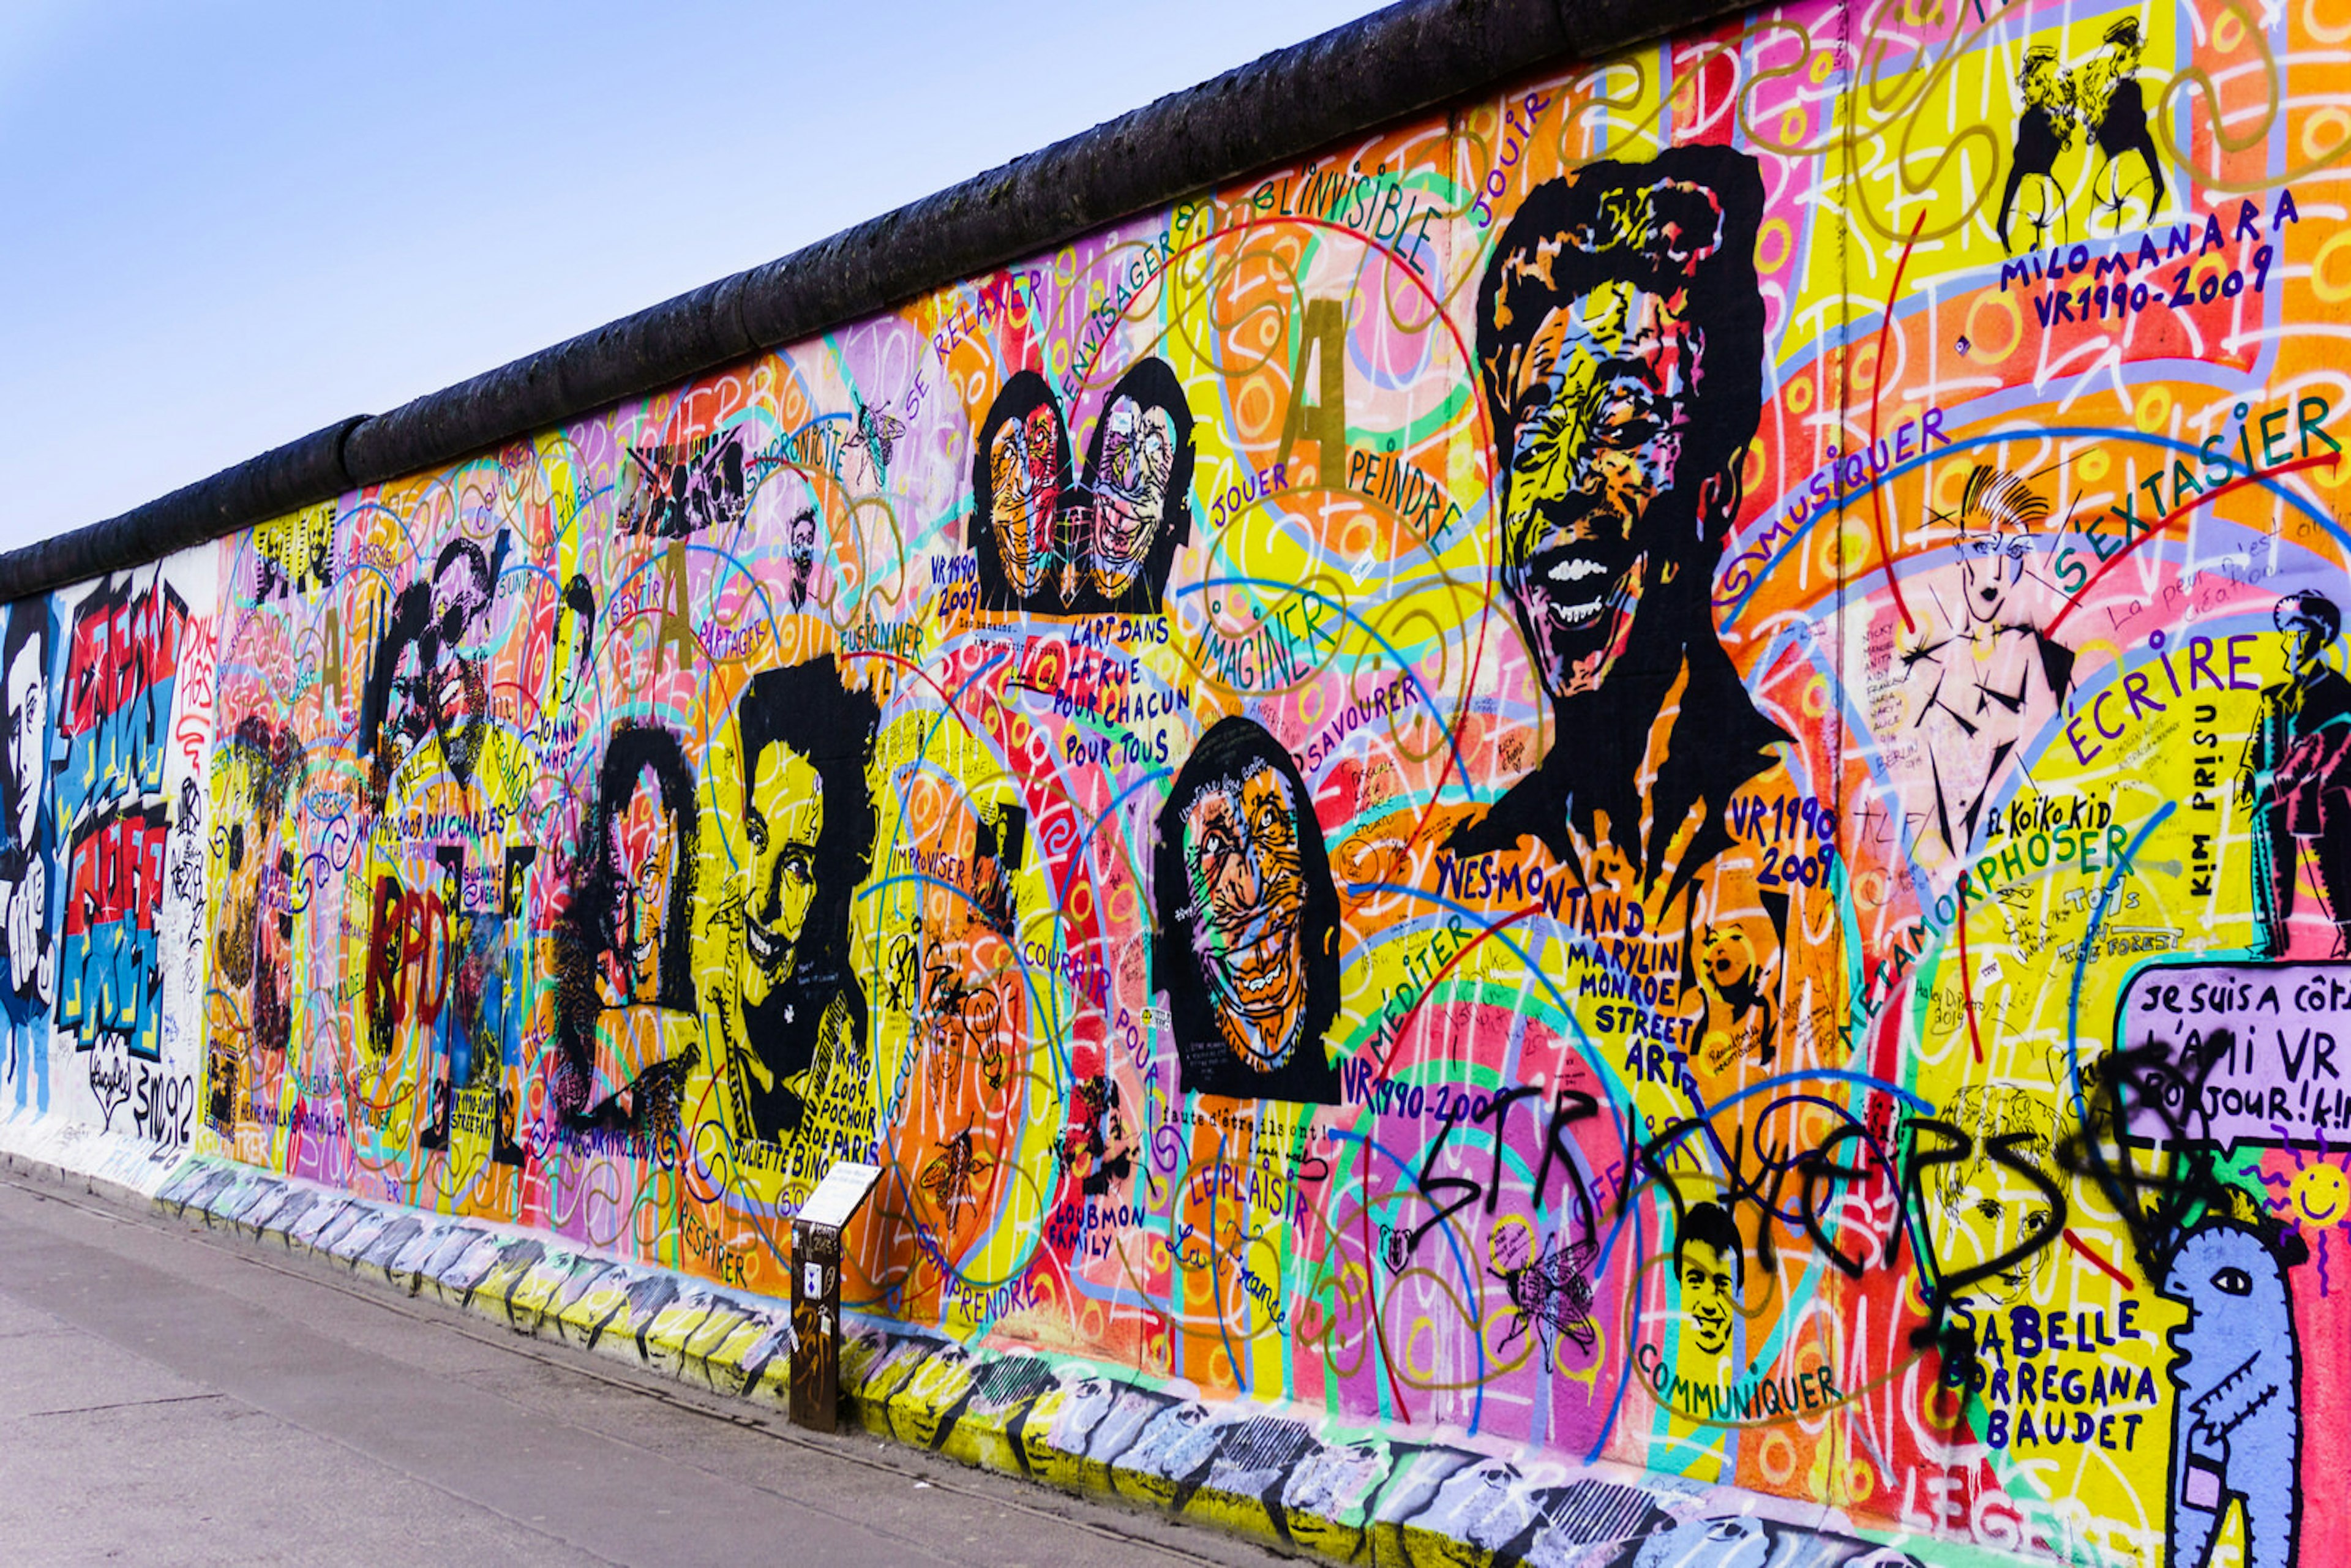 Portraits daubed in black sit on a background of chaotic psychedelic graffiti on a preserved stretch of the east side of the Berlin wall - Lonely Planet © Ewais / Shutterstock